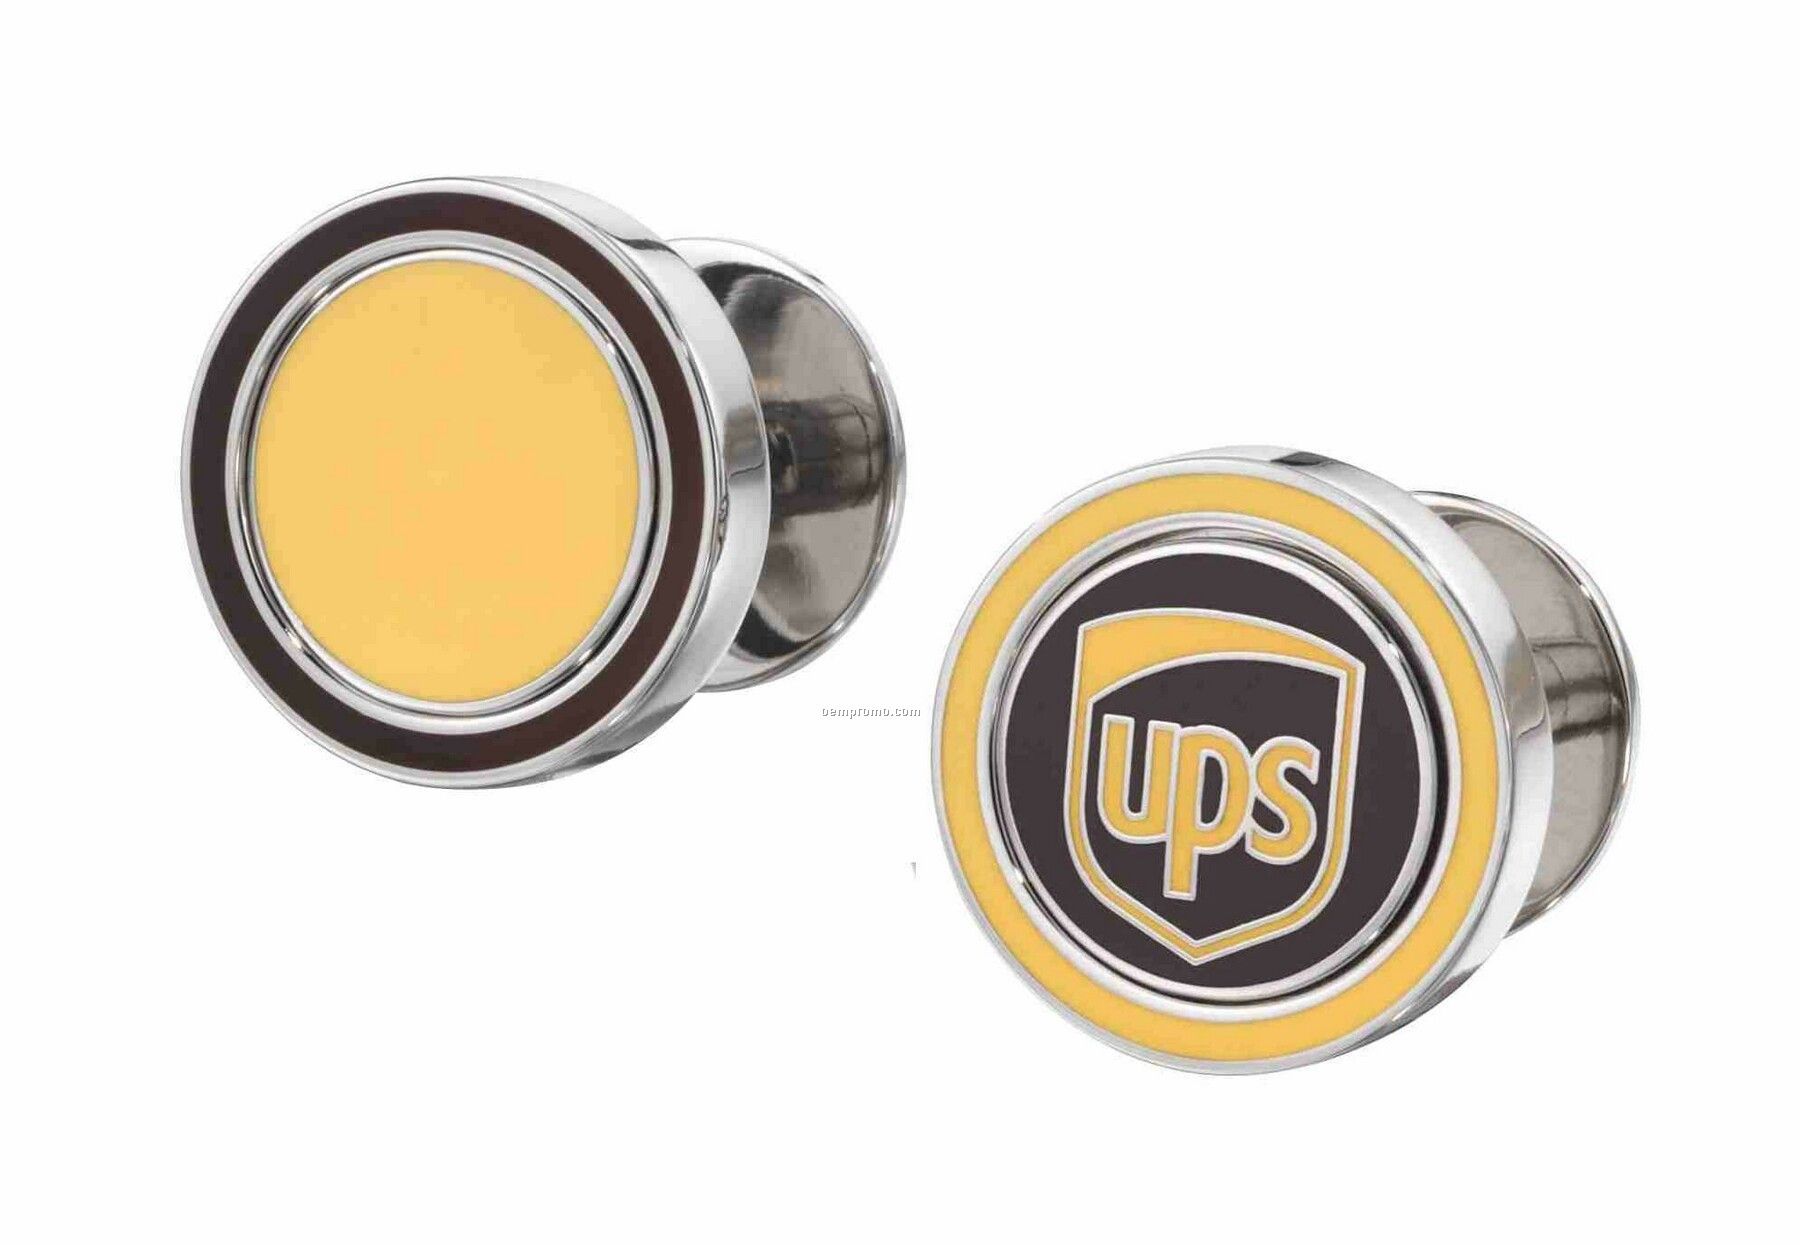 Ovations - Kudos Silver Plated Reversible Cuff Links